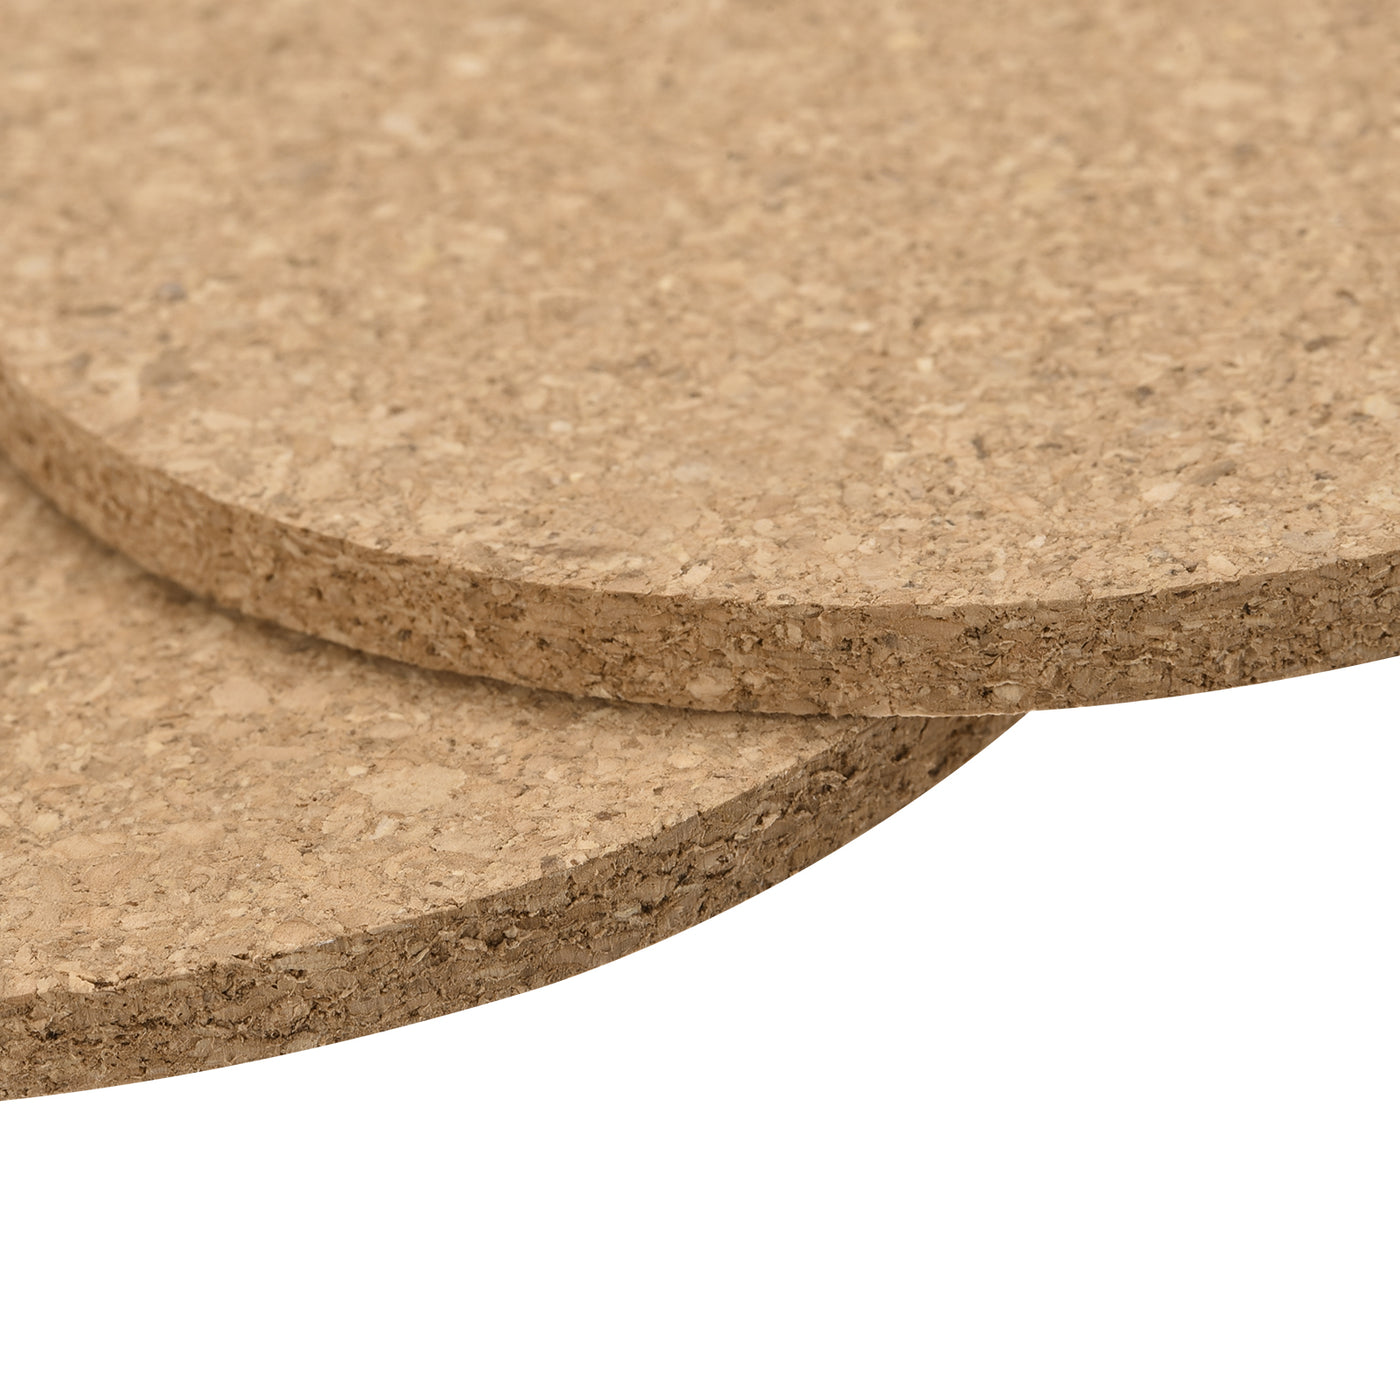 uxcell Uxcell 100mm(3.94") Round Coasters 5mm Thick Cork Cup Mat Pad for Tableware 8pcs